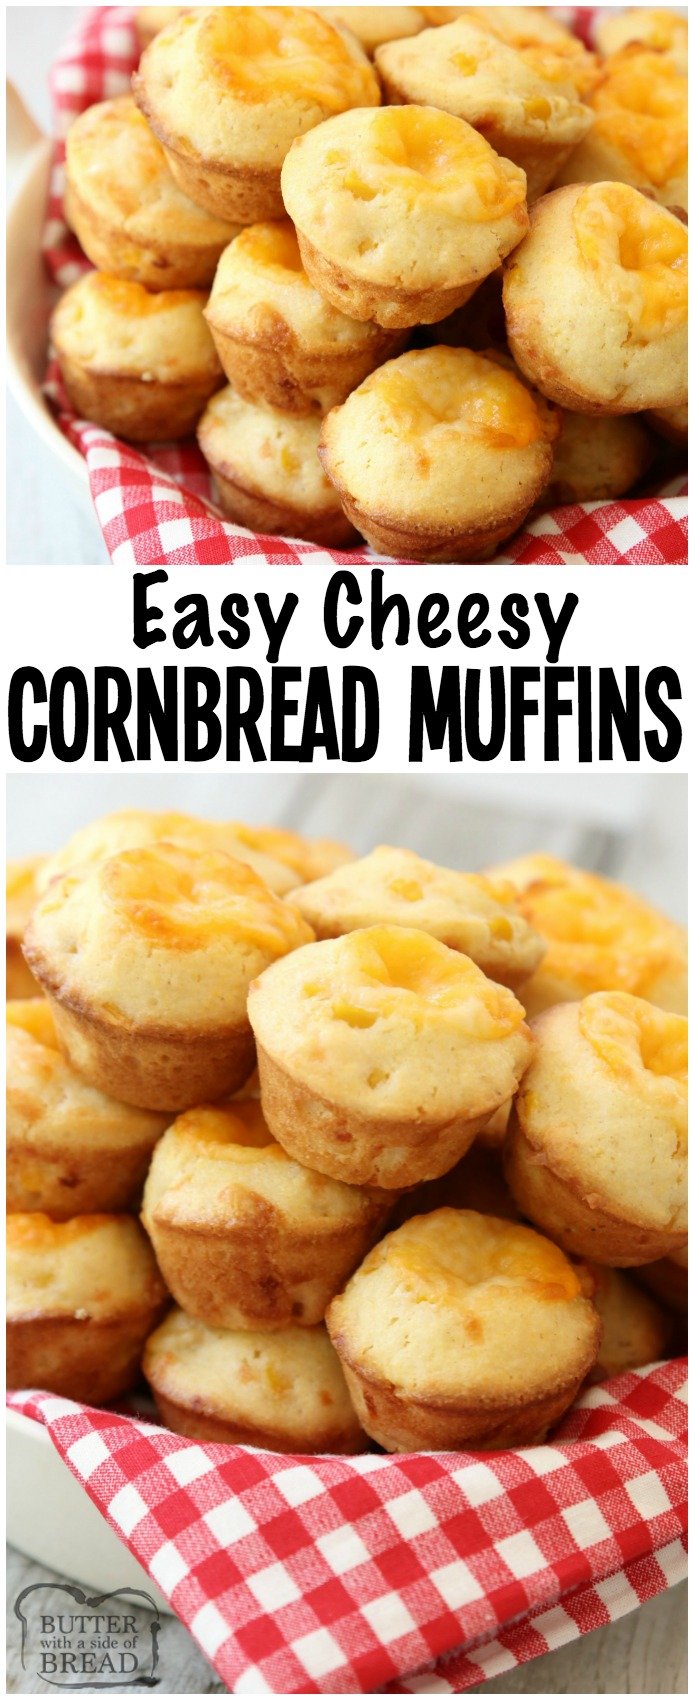 Cheesy Cornbread Muffins are delicate, flavorful honey cornbread with a cheddar cheese addition! Fun, bite-sized mini cornbread muffins are perfect for accompanying lunch or dinner any time of the year! #cornbread #muffin #recipe #cheese from BUTTER WITH A SIDE OF BREAD